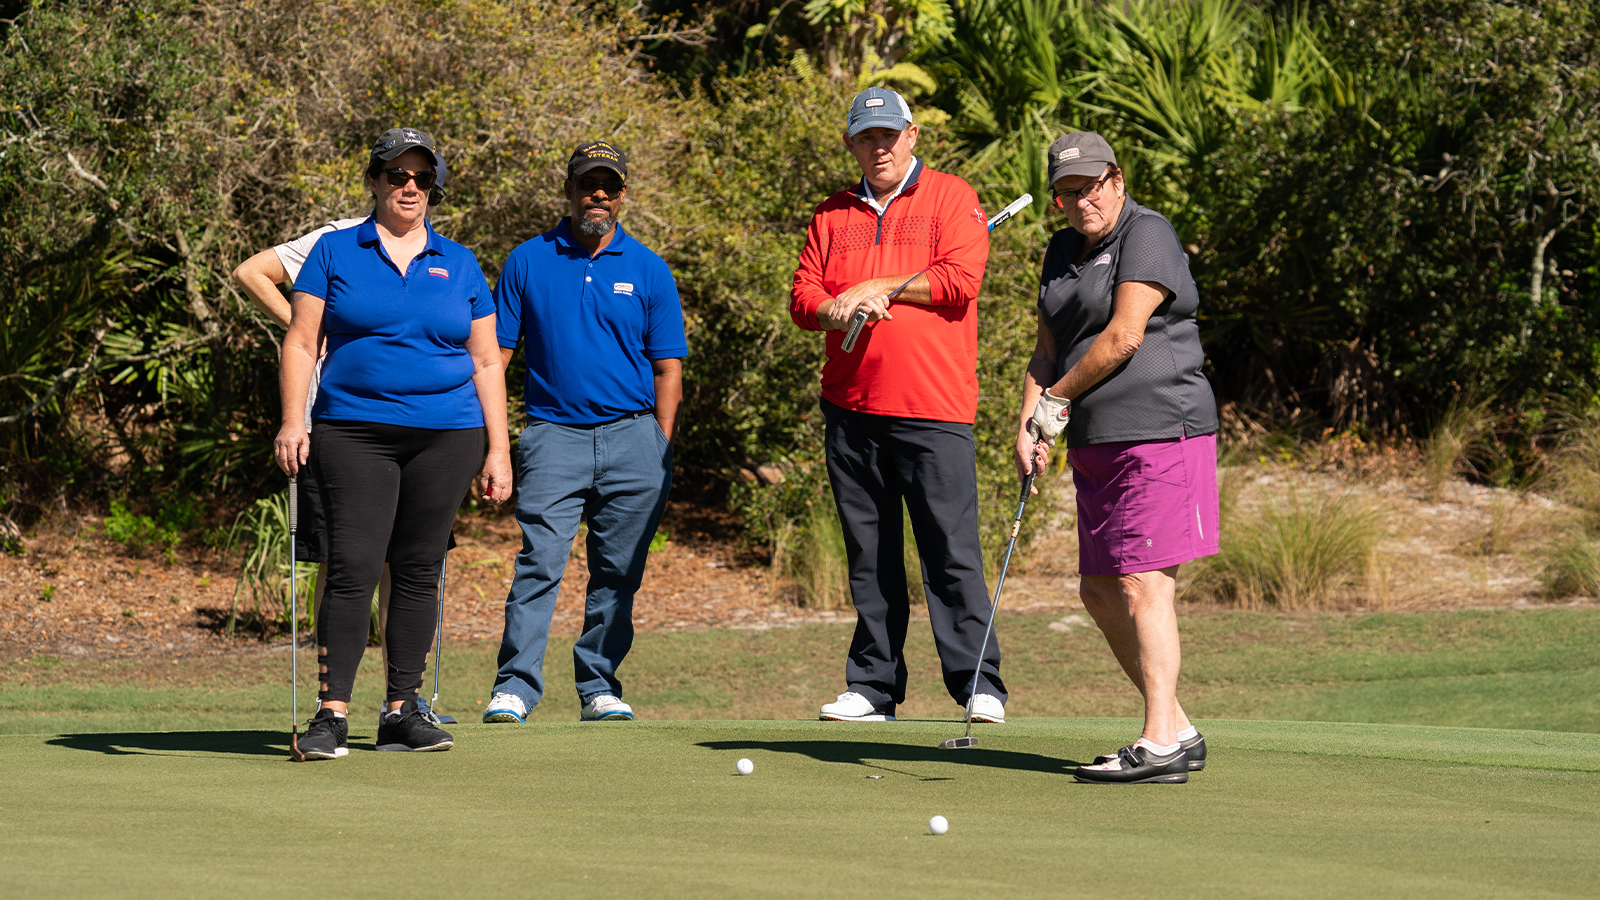 PGA HOPE aspires to create a physically and emotionally healthier Veteran community by shaping lives, changing lives, and possibly saving lives through the game of golf.